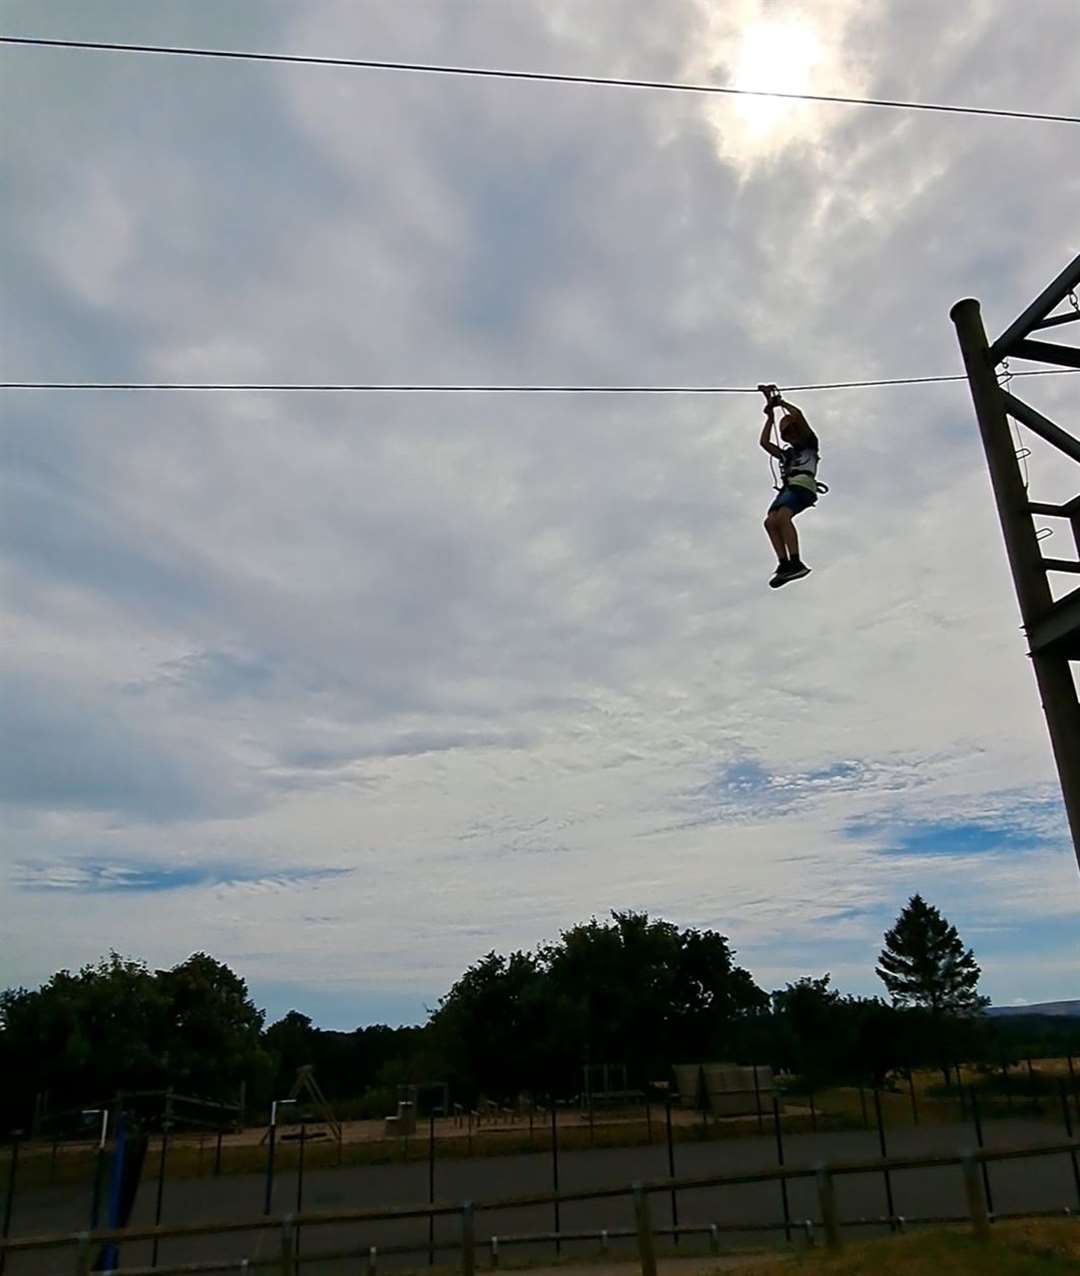 My son sets off on the zipline